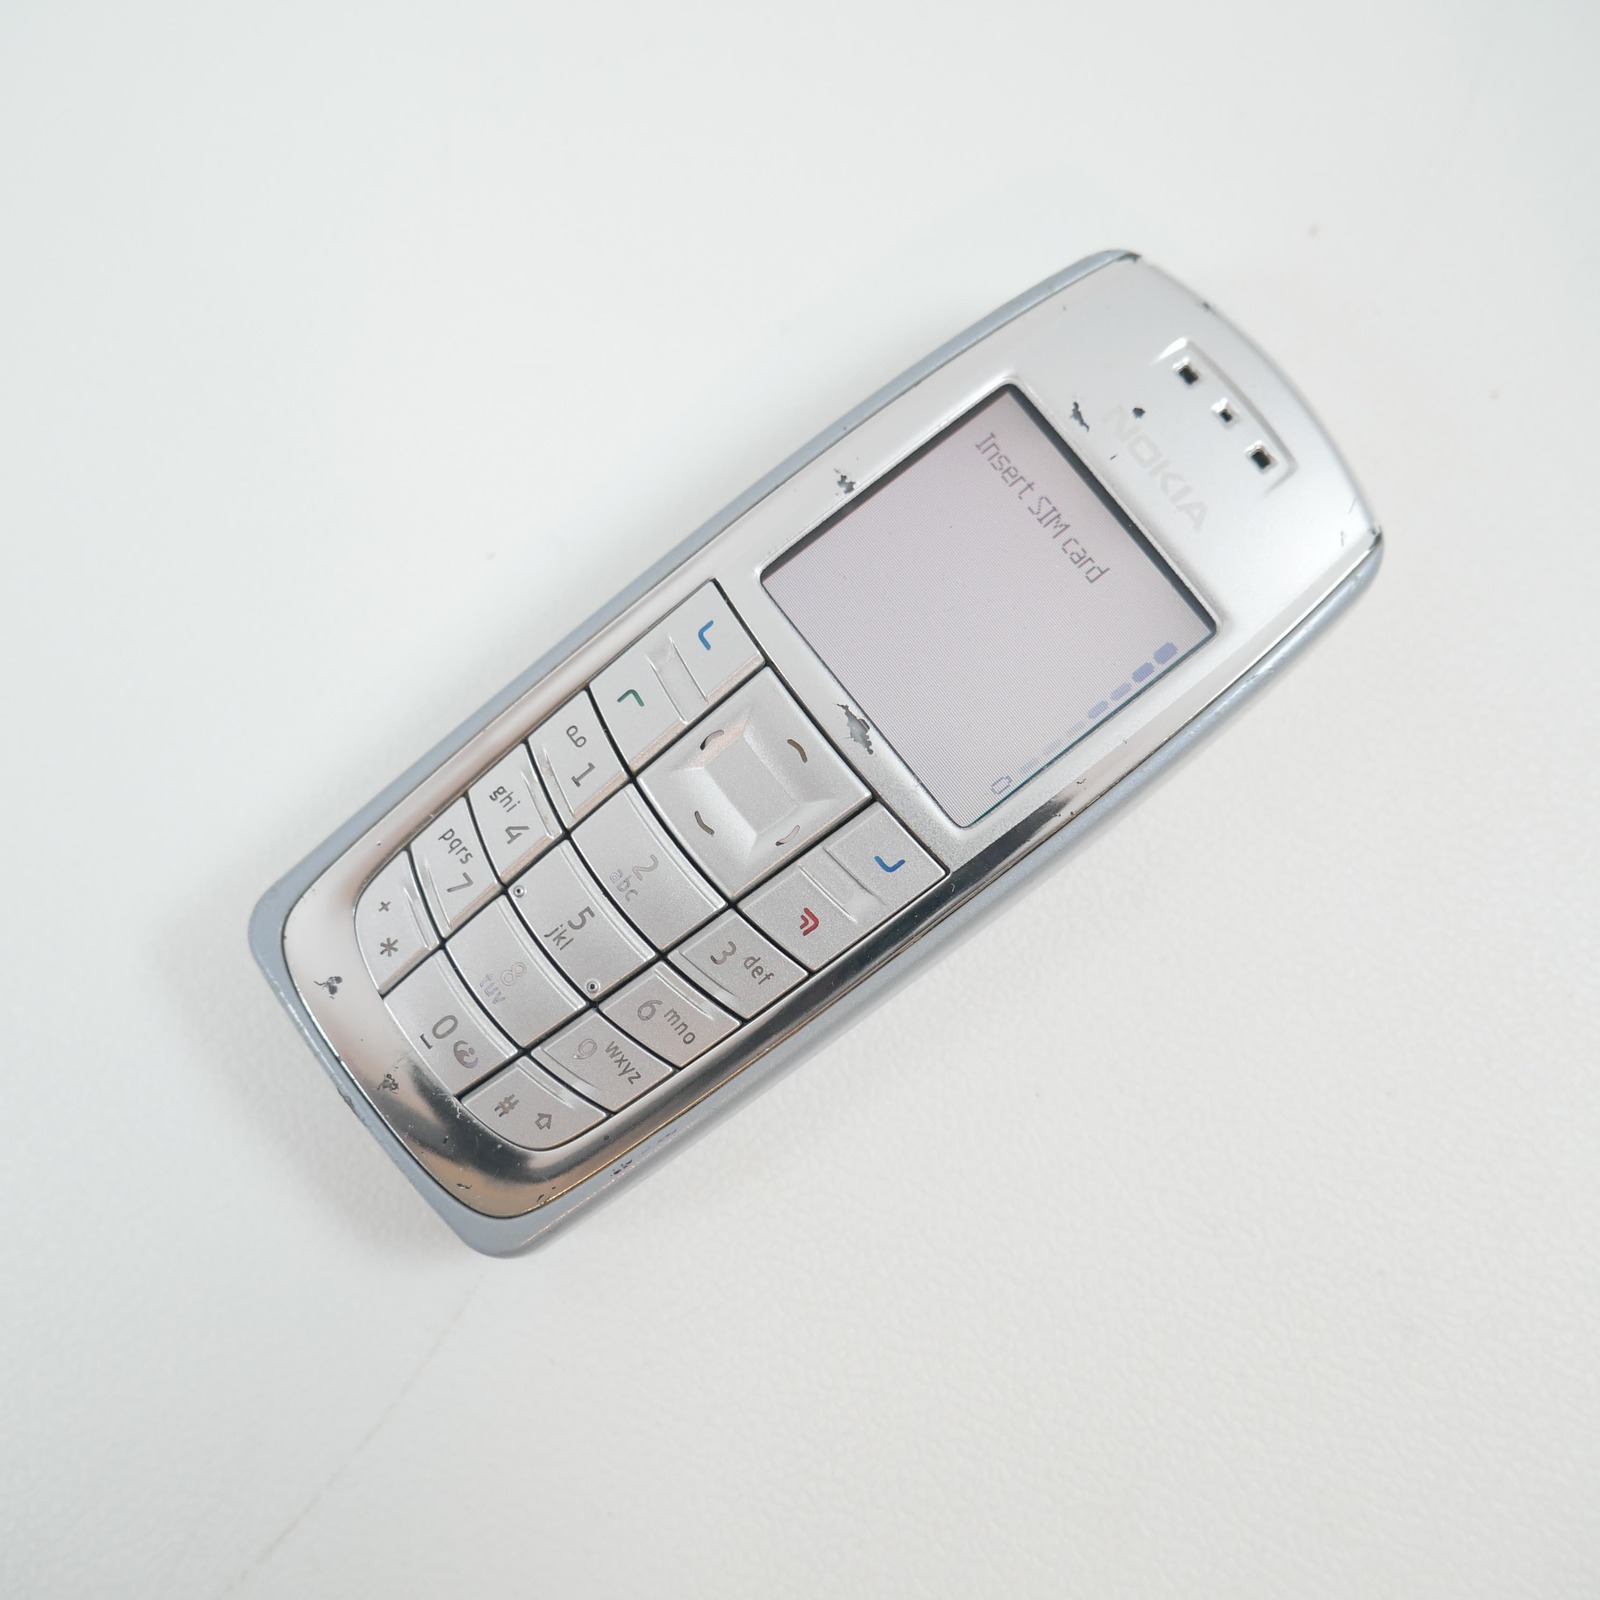 Primary image for Nokia 3120b Silver/Gray/White Phone